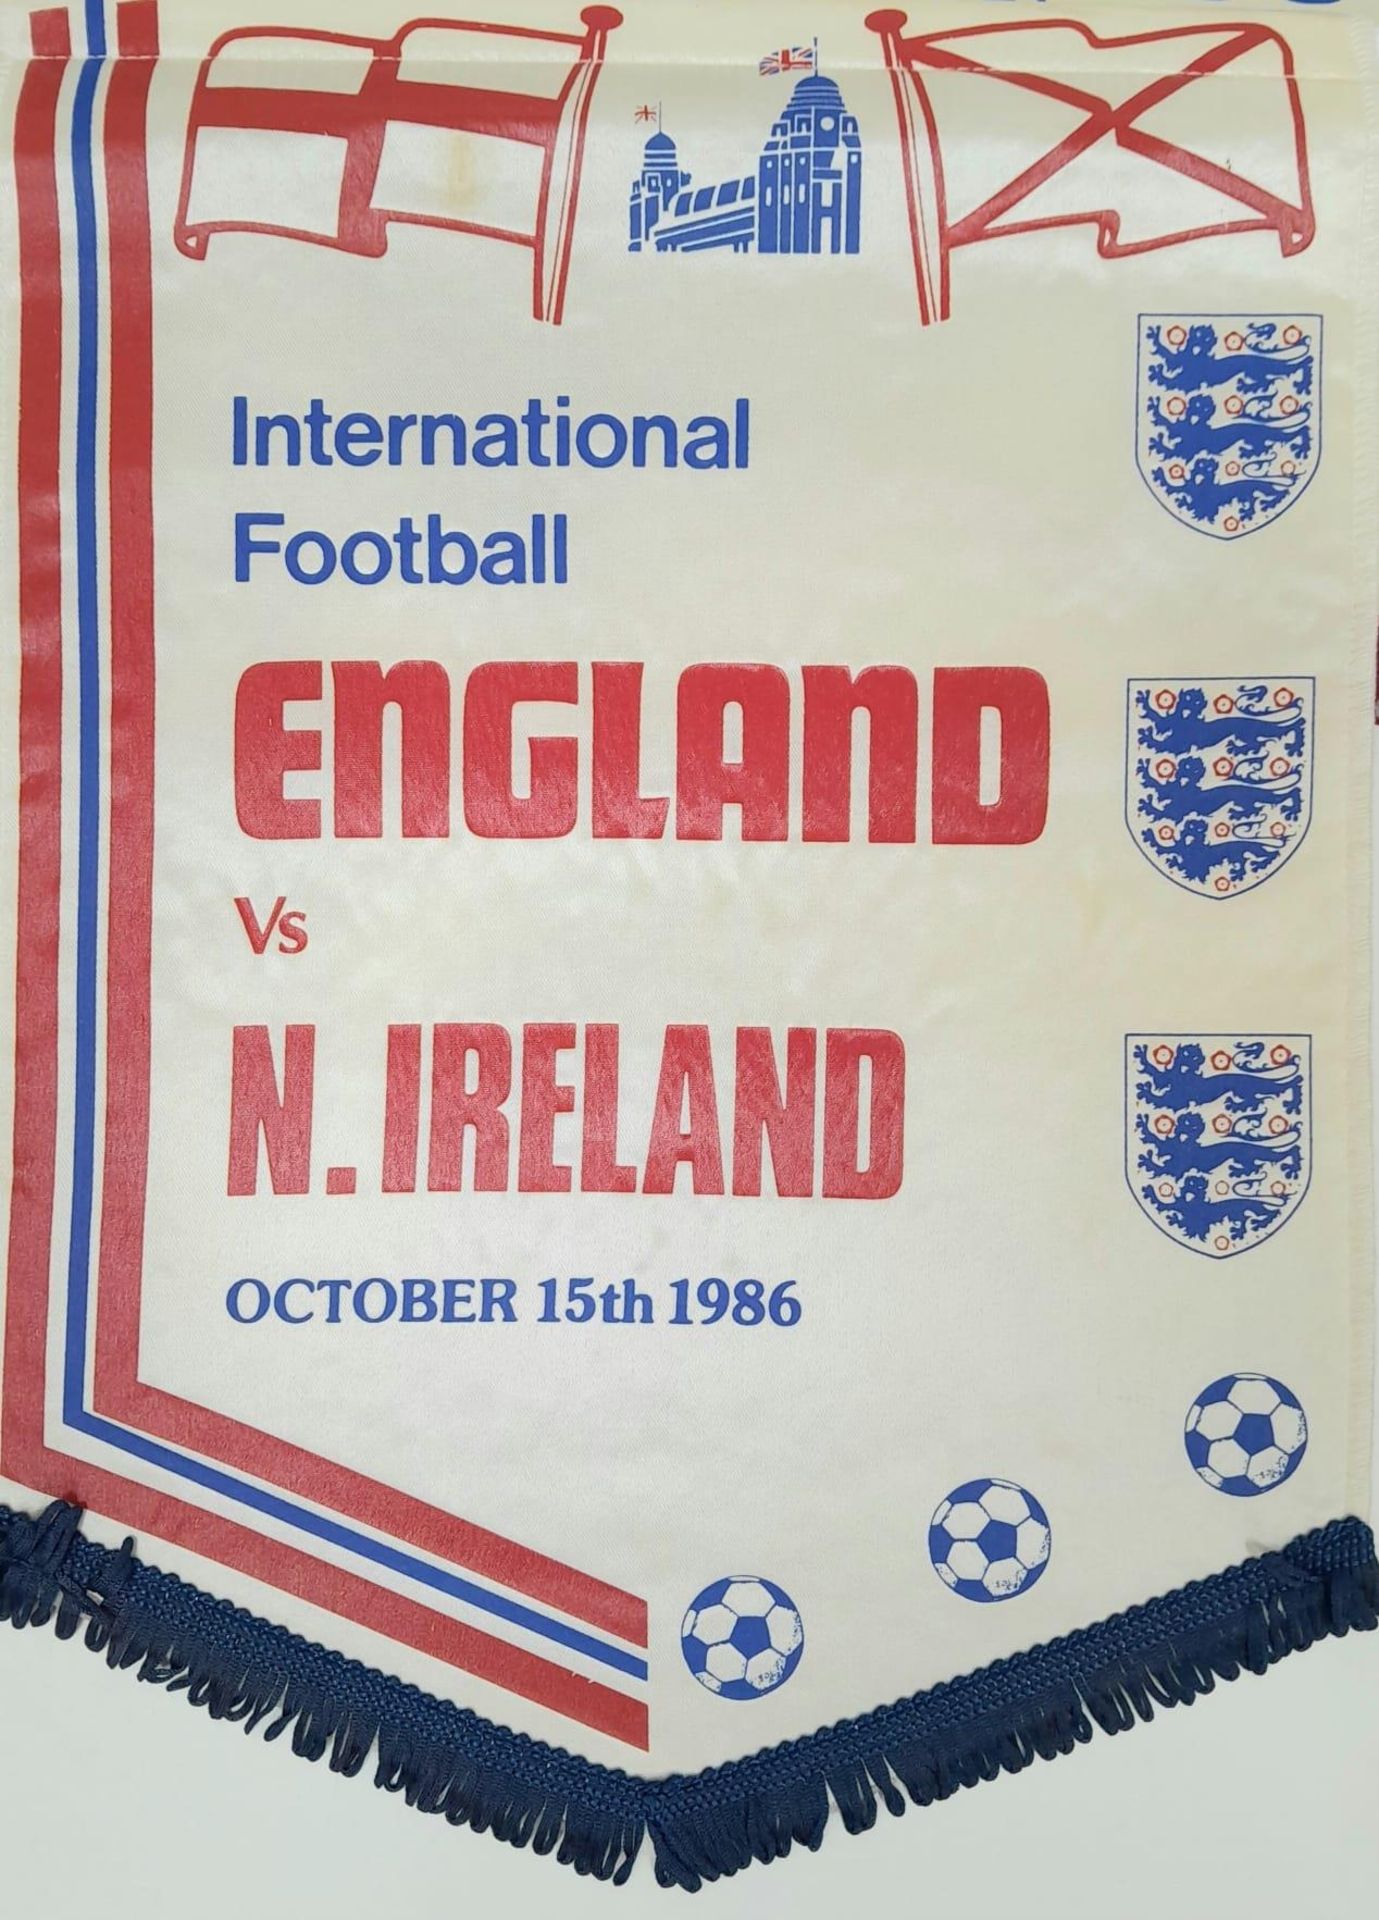 A COLLECTION OF 11 ENGLAND FOOTBALL MATCH PENNANTS FROM DIFFERENT INTERNATIONAL MATCHES , - Image 4 of 4